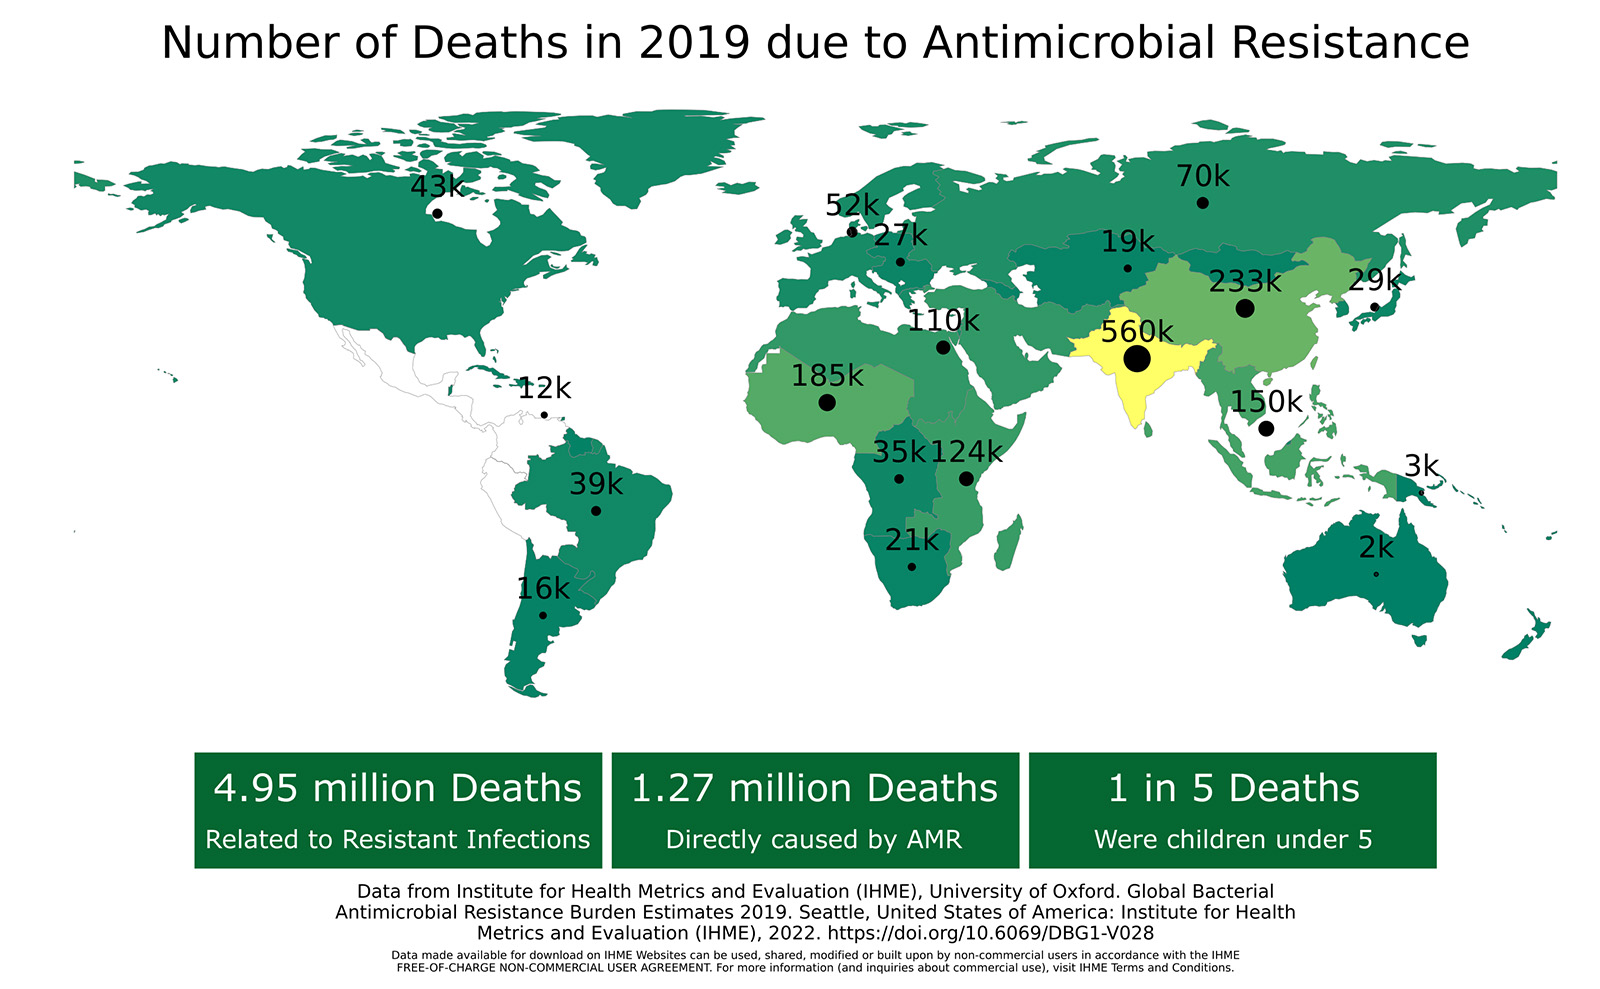 Global map of  number of deaths due to AMR resistance